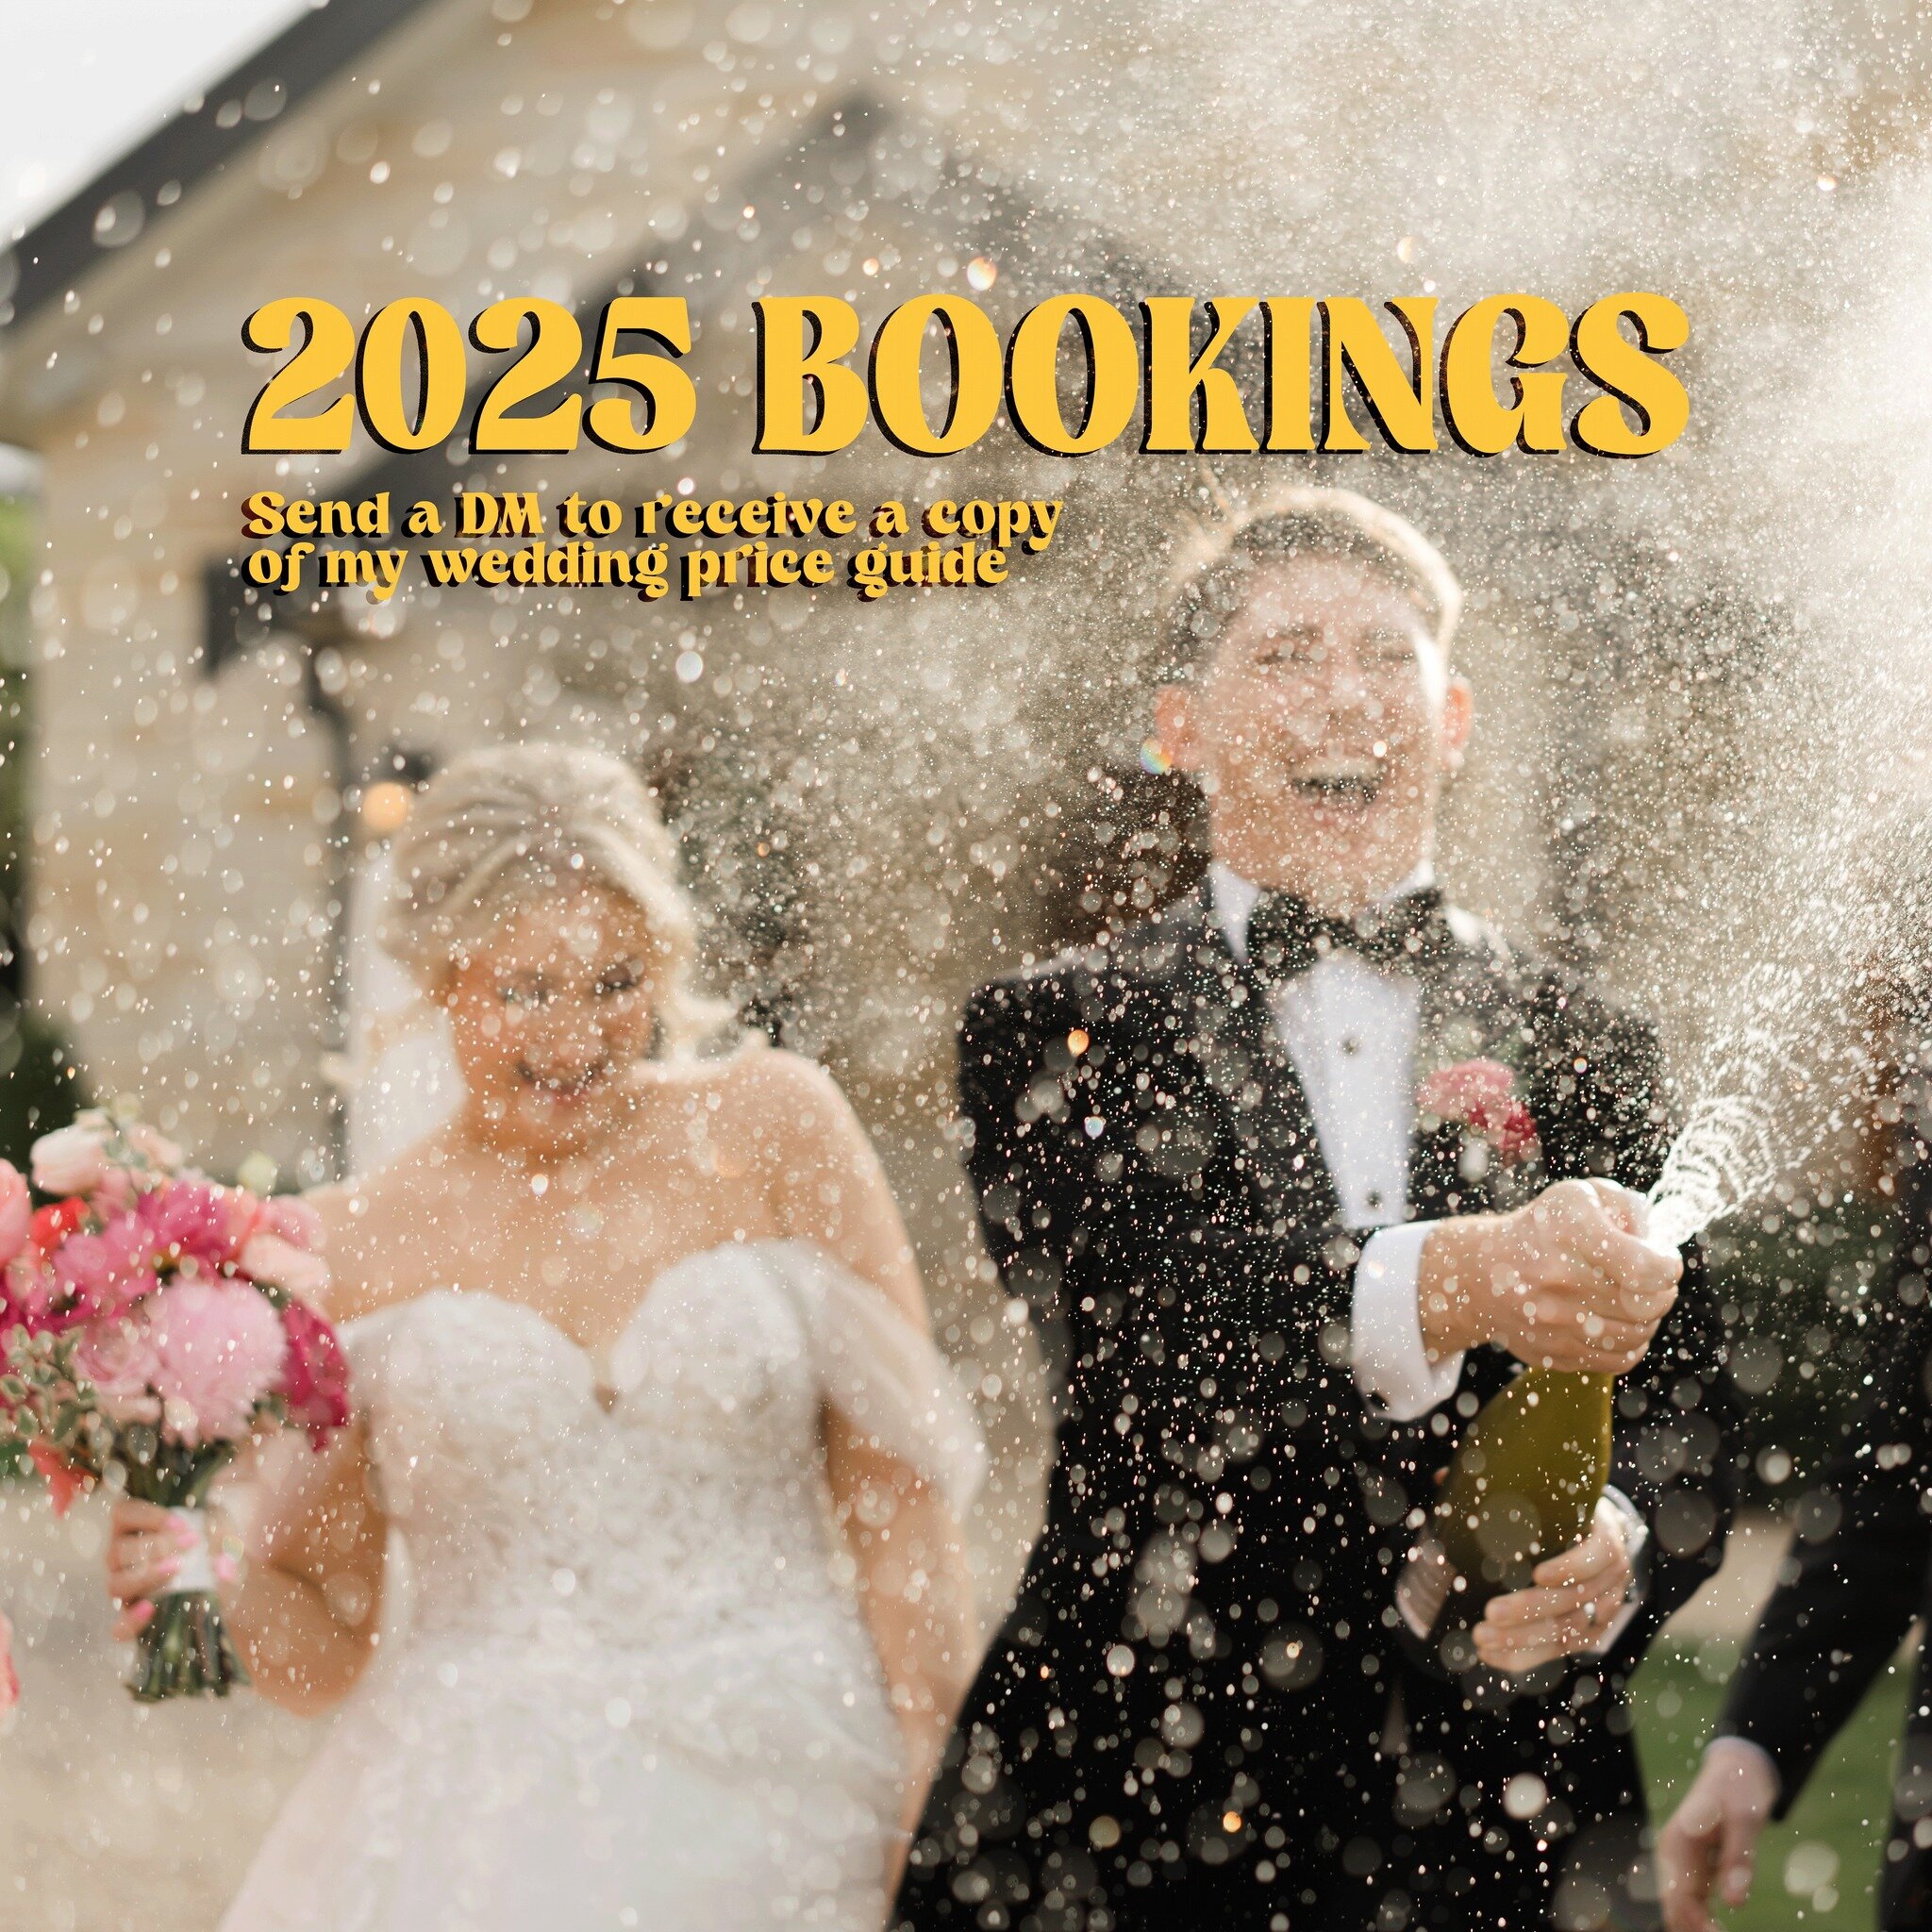 2025 BOOKINGS | Want a copy of my wedding price guide? 

Shoot me a DM ✌️